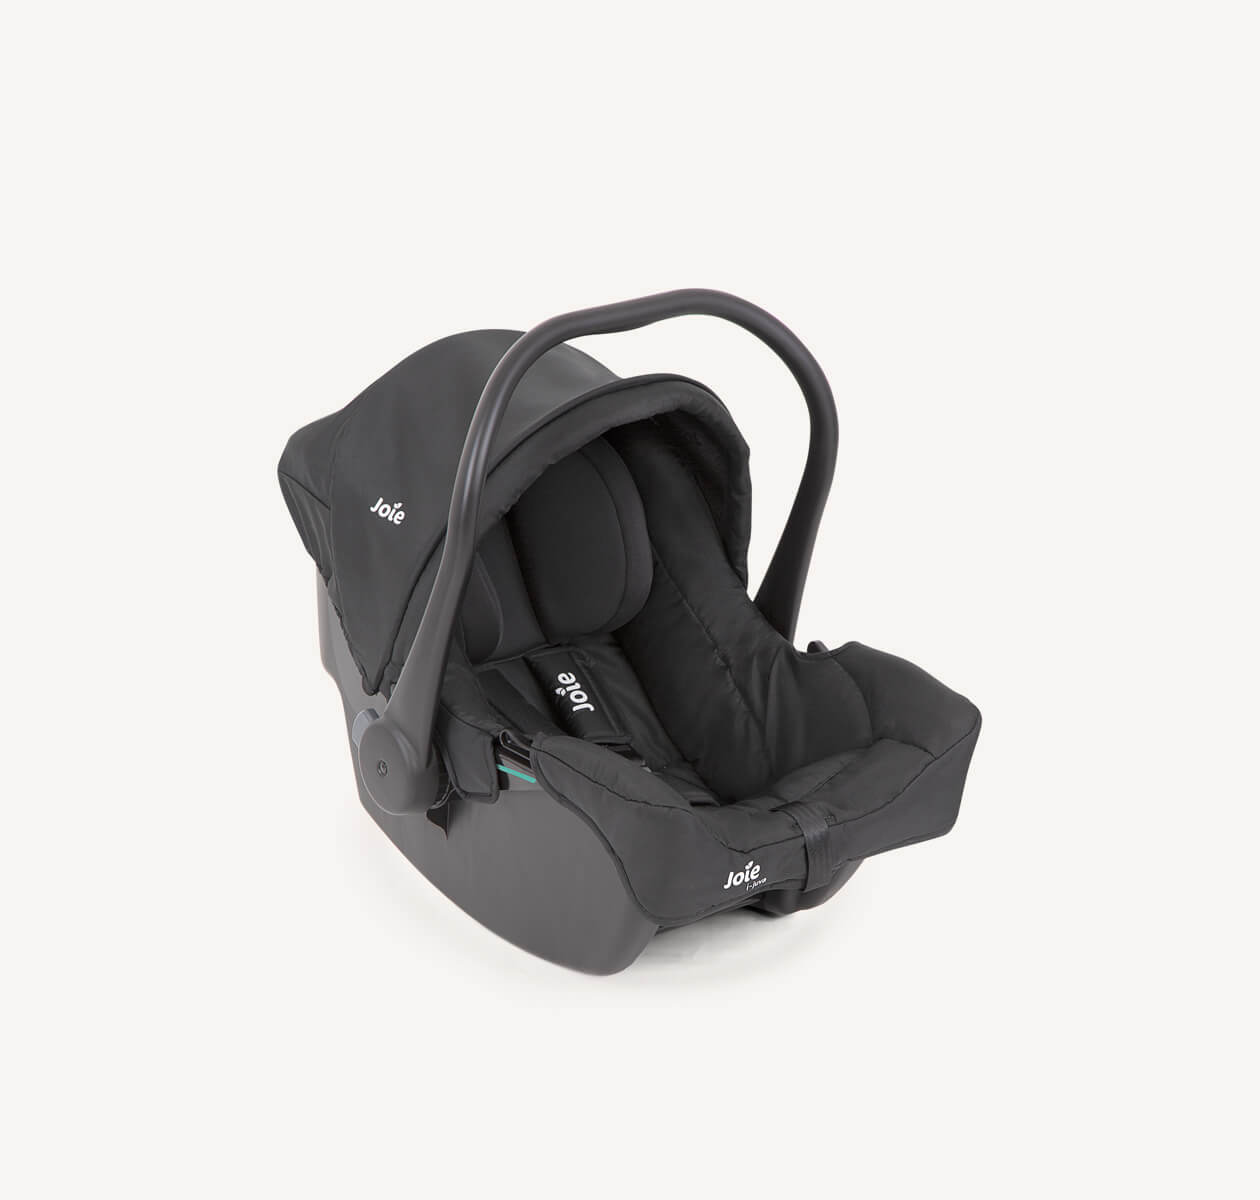  Joie i-juva baby car seat in black from a right angle with canopy raised.